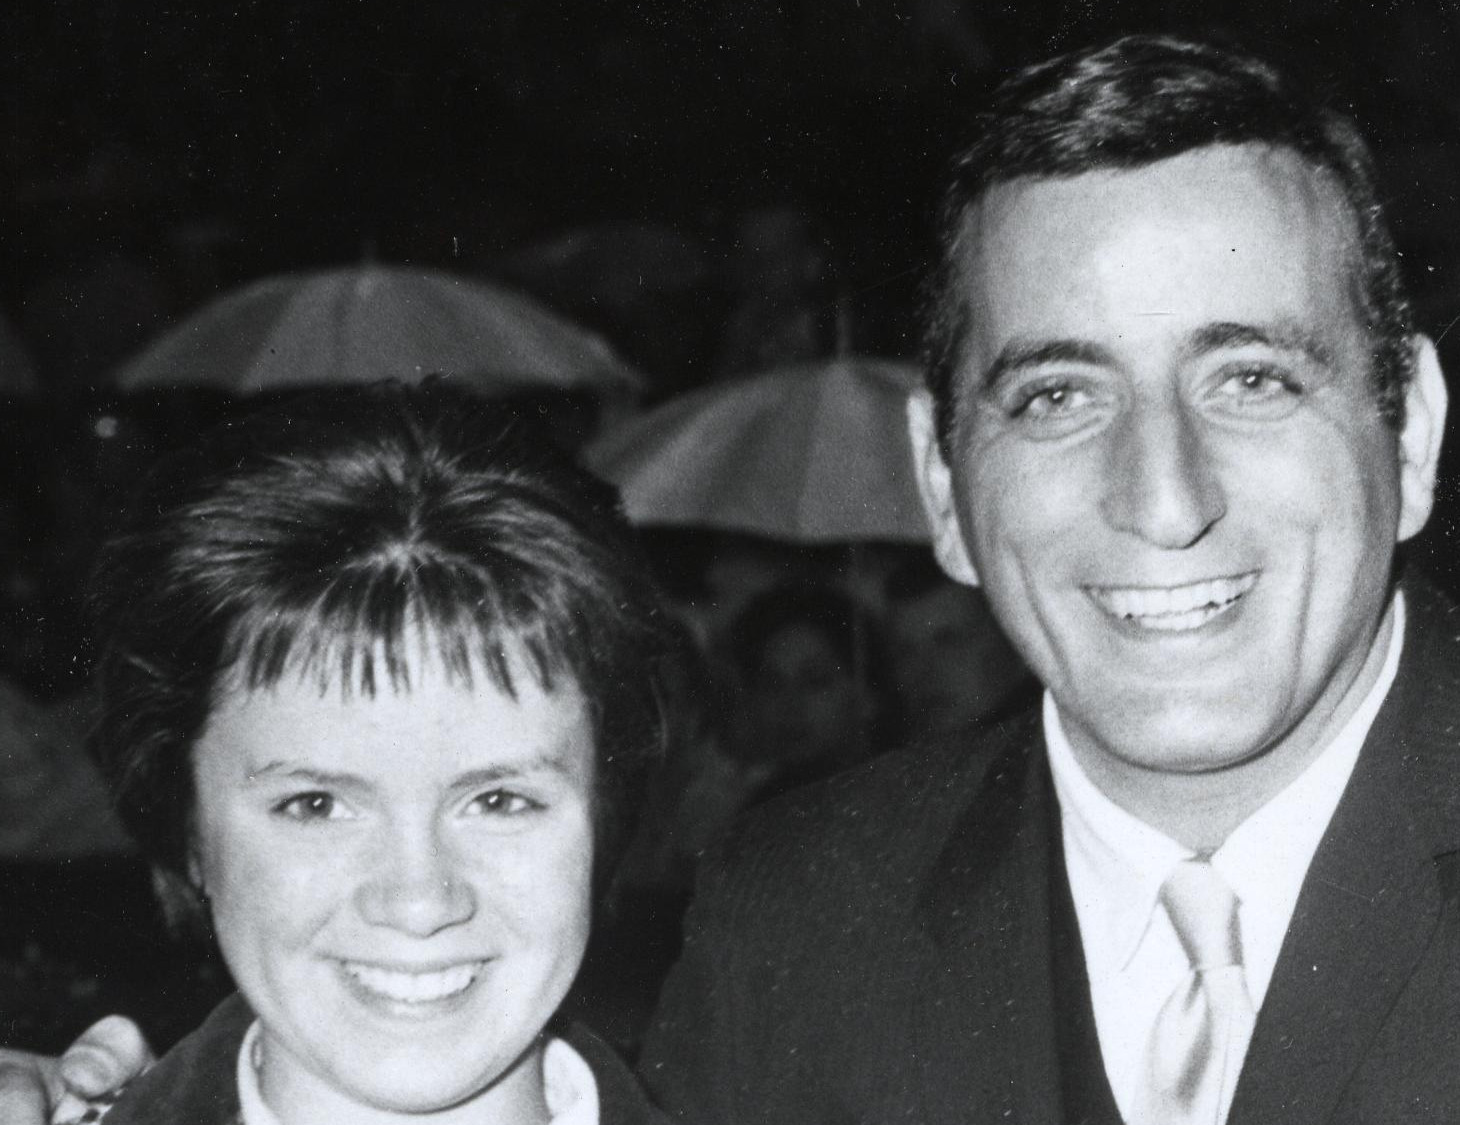 Tony Bennett Photograph With Unidentified Woman